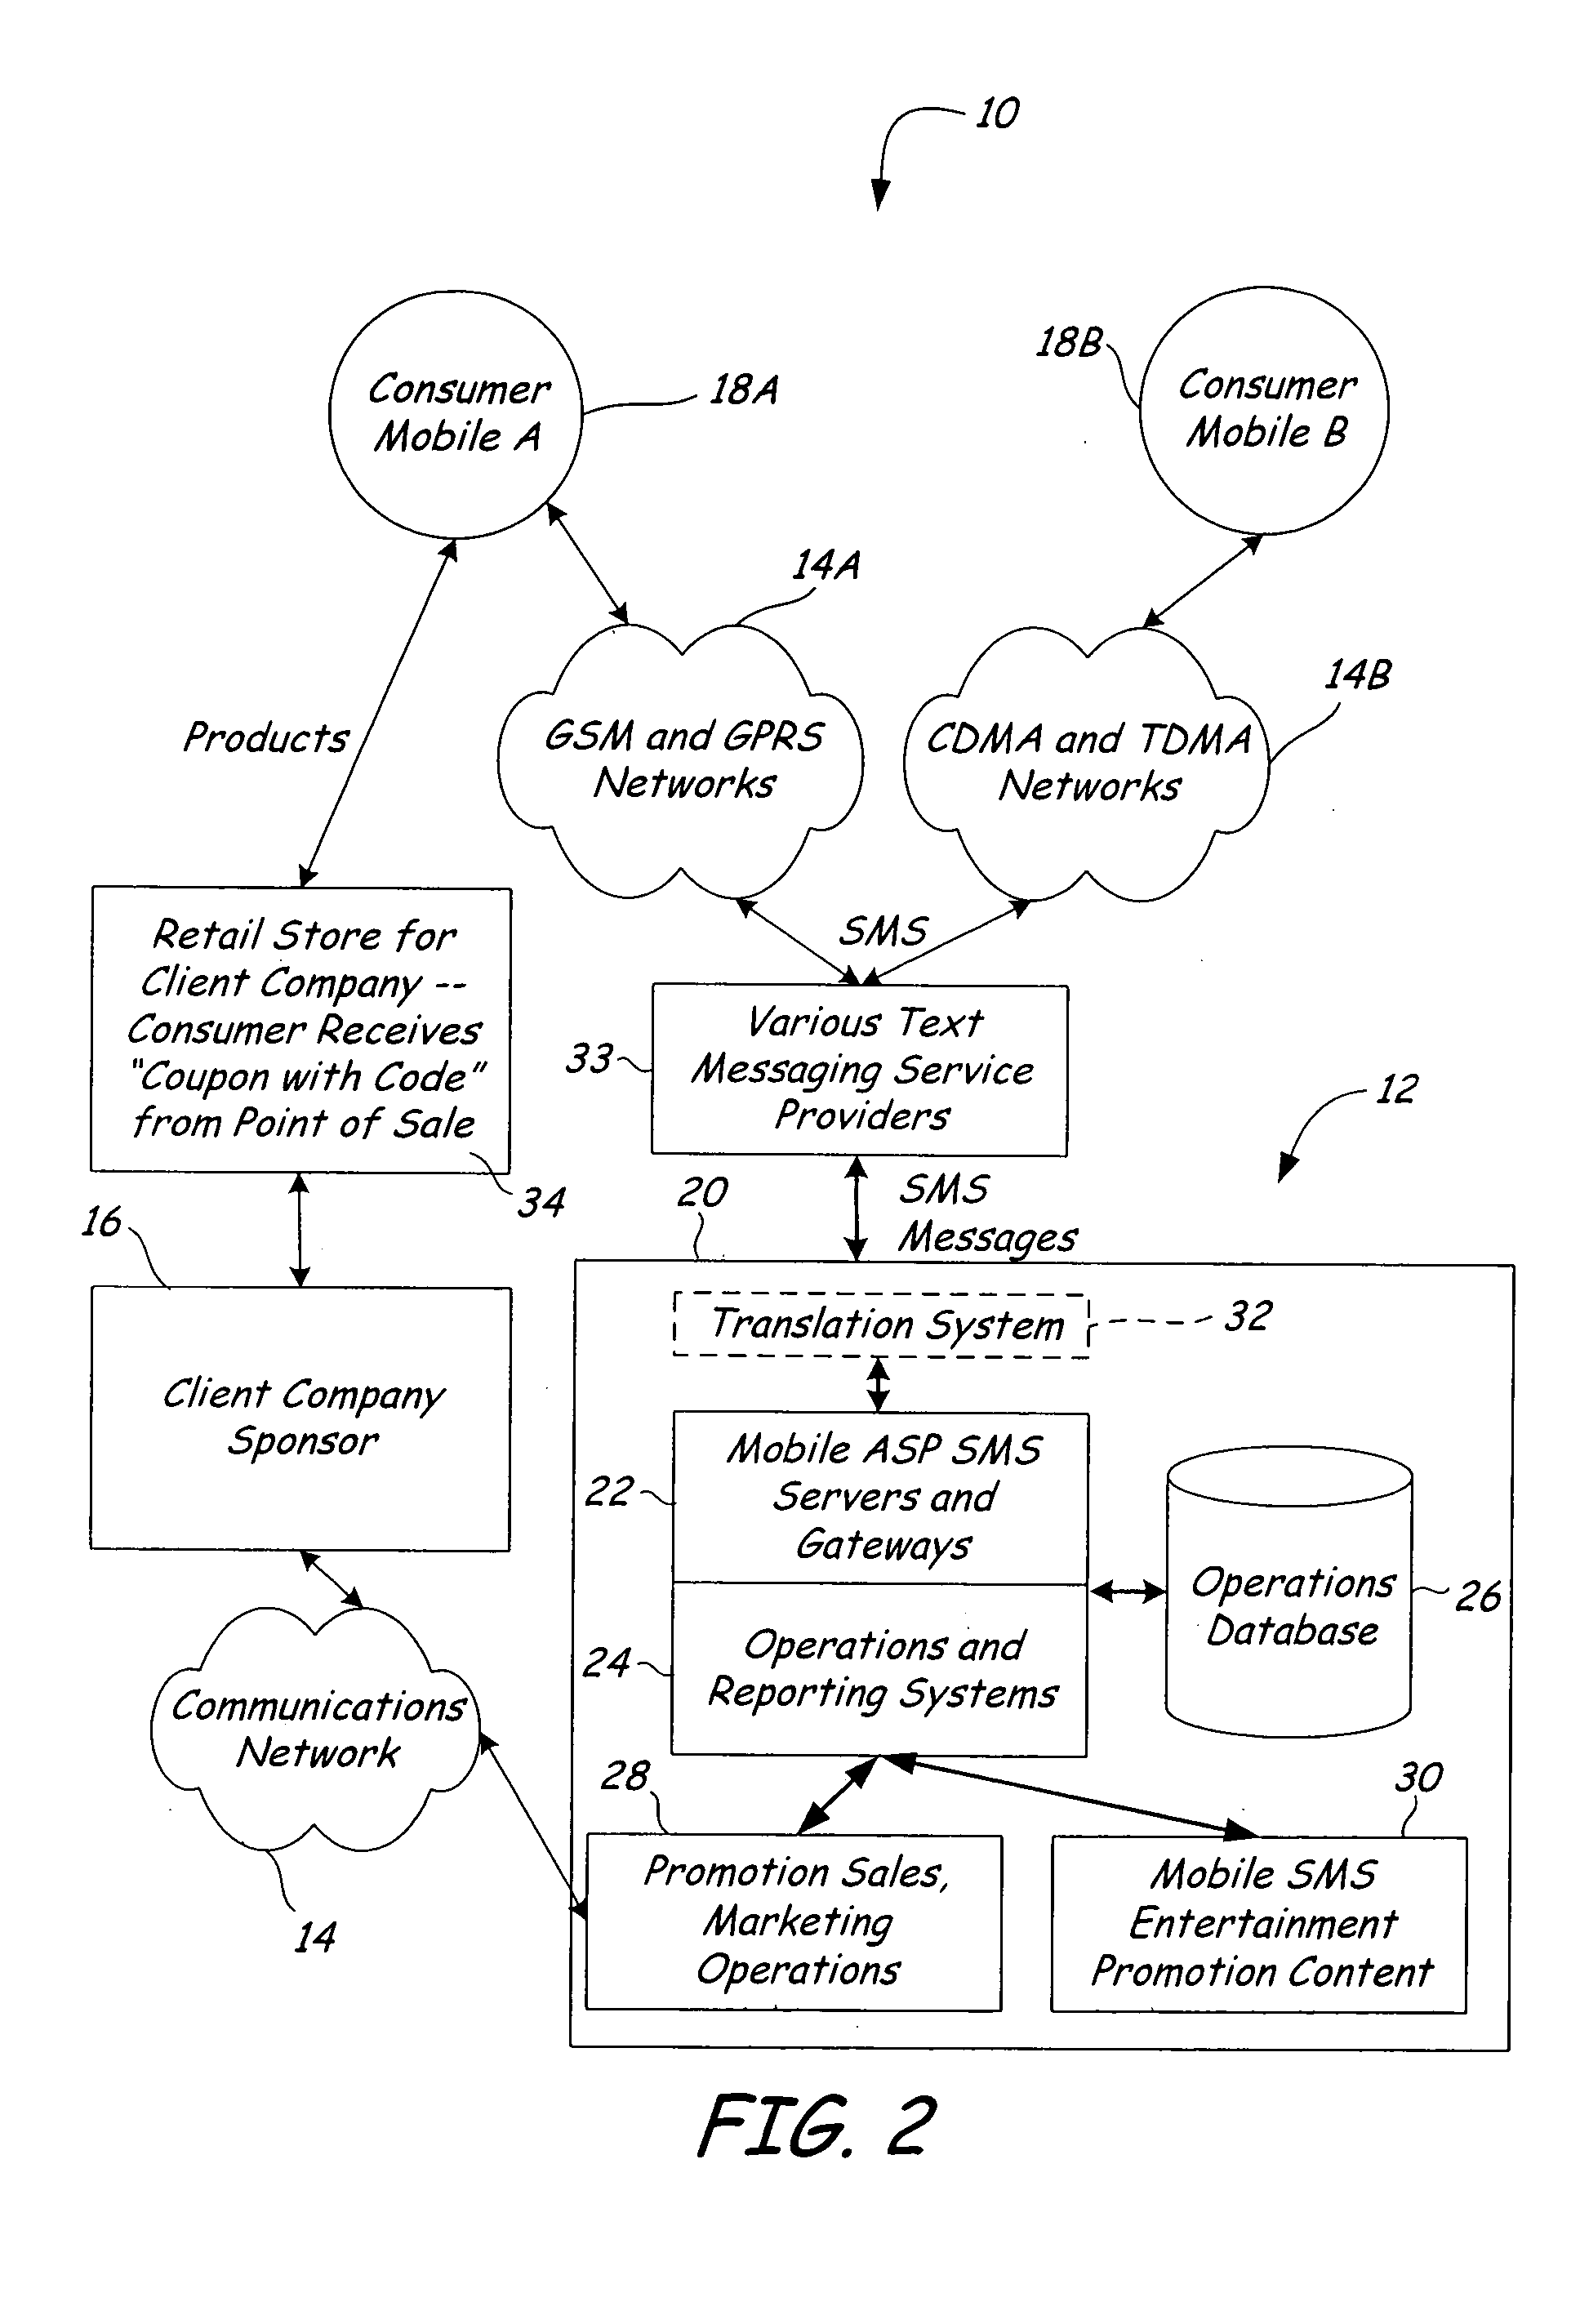 System and method for mobile telephone text message consumer promotions